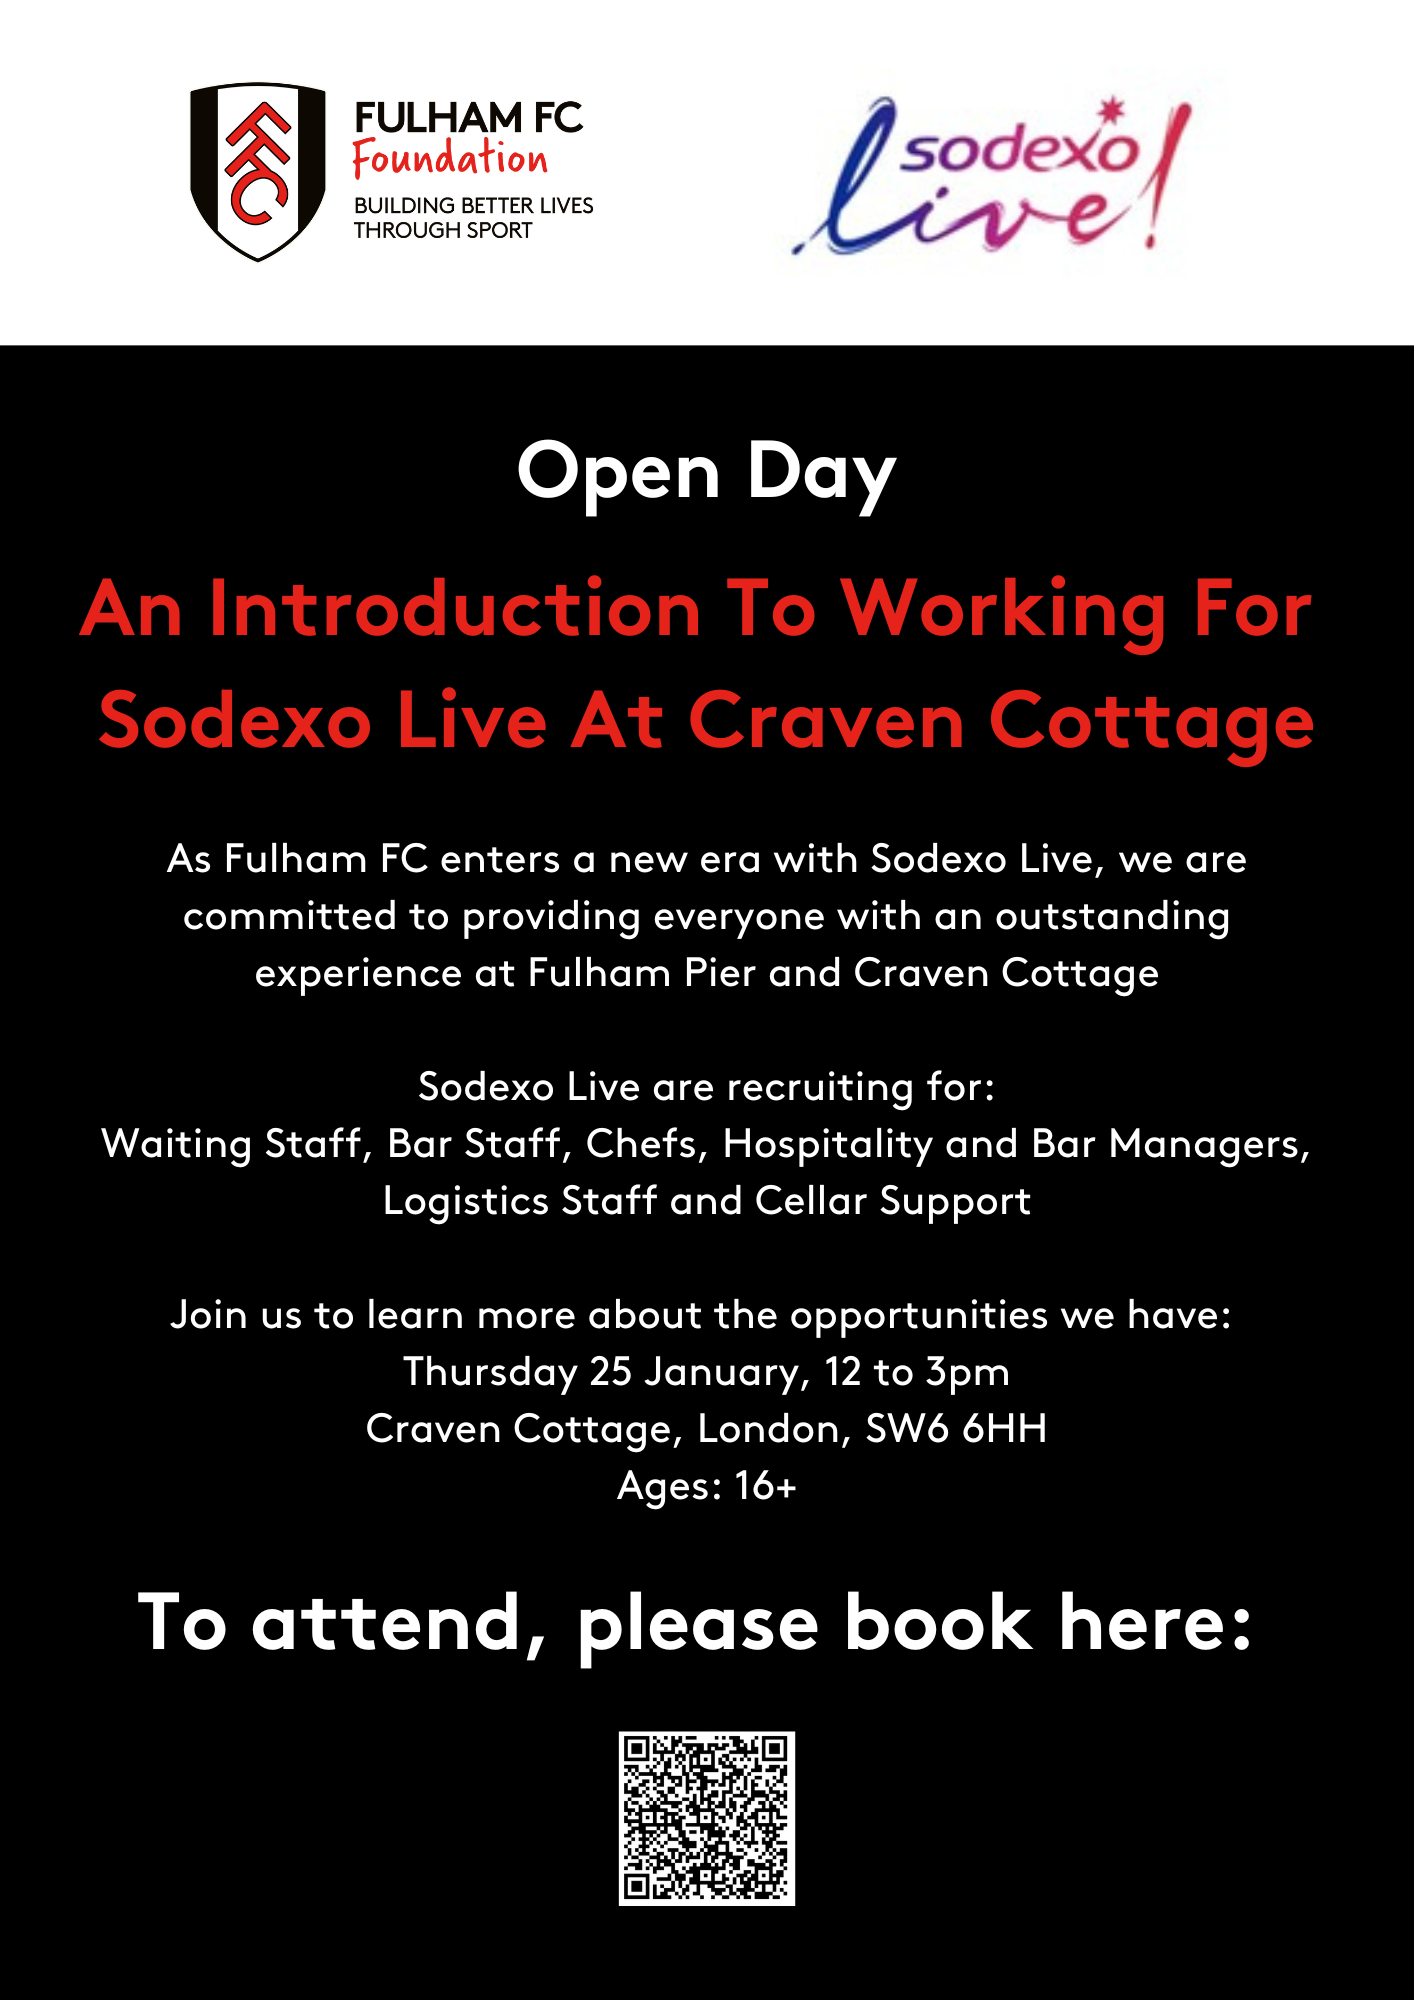 Introduction to working for Sodexo Live! Image